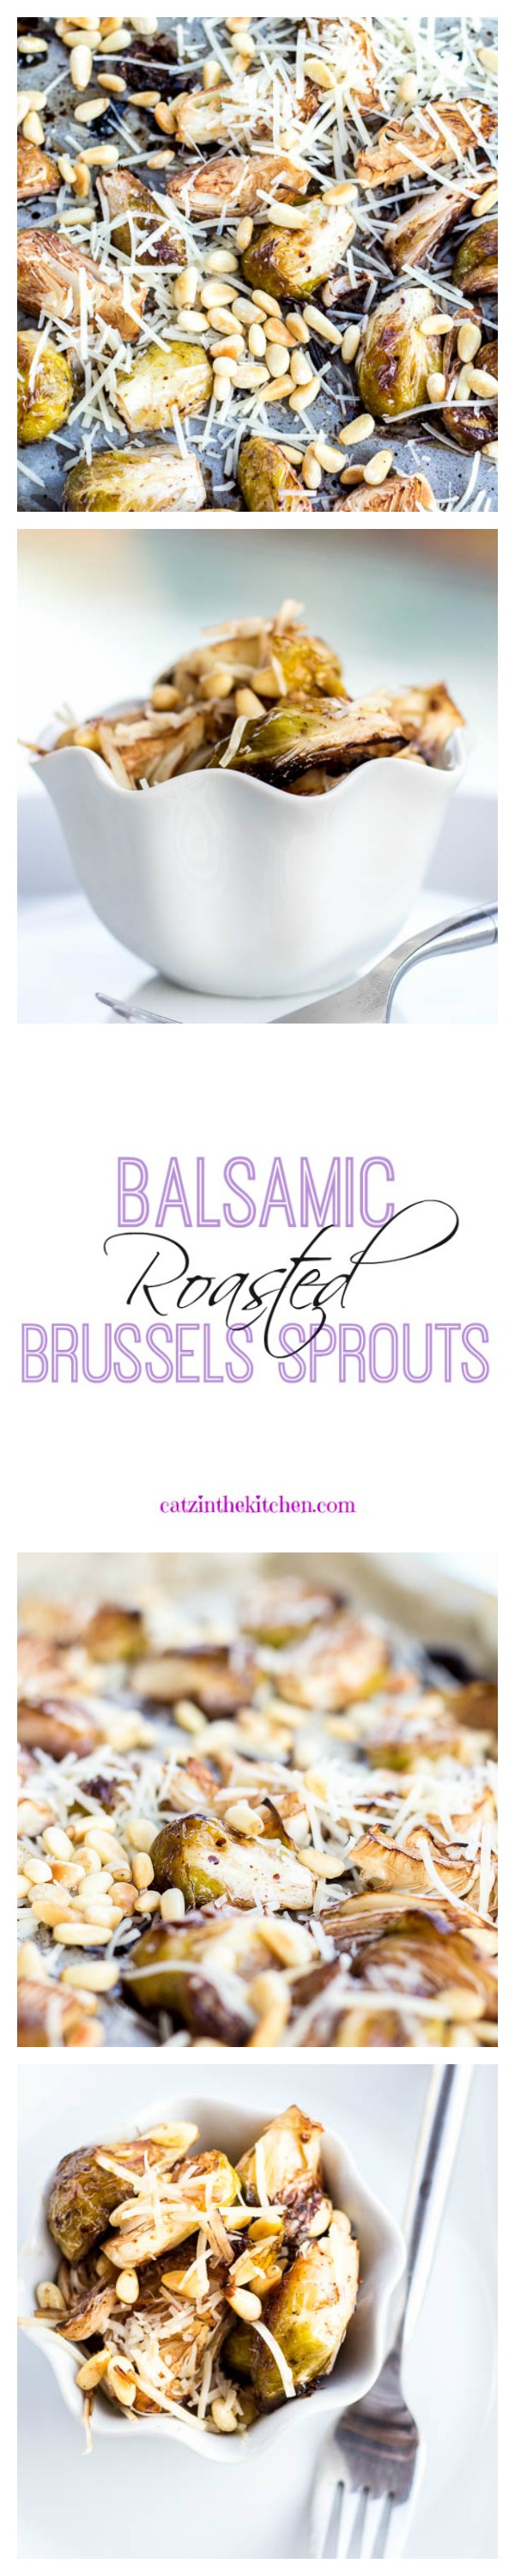 Balsamic Roasted Brussels Sprouts | Catz in the Kitchen | catzinthekitchen.com #balsamic